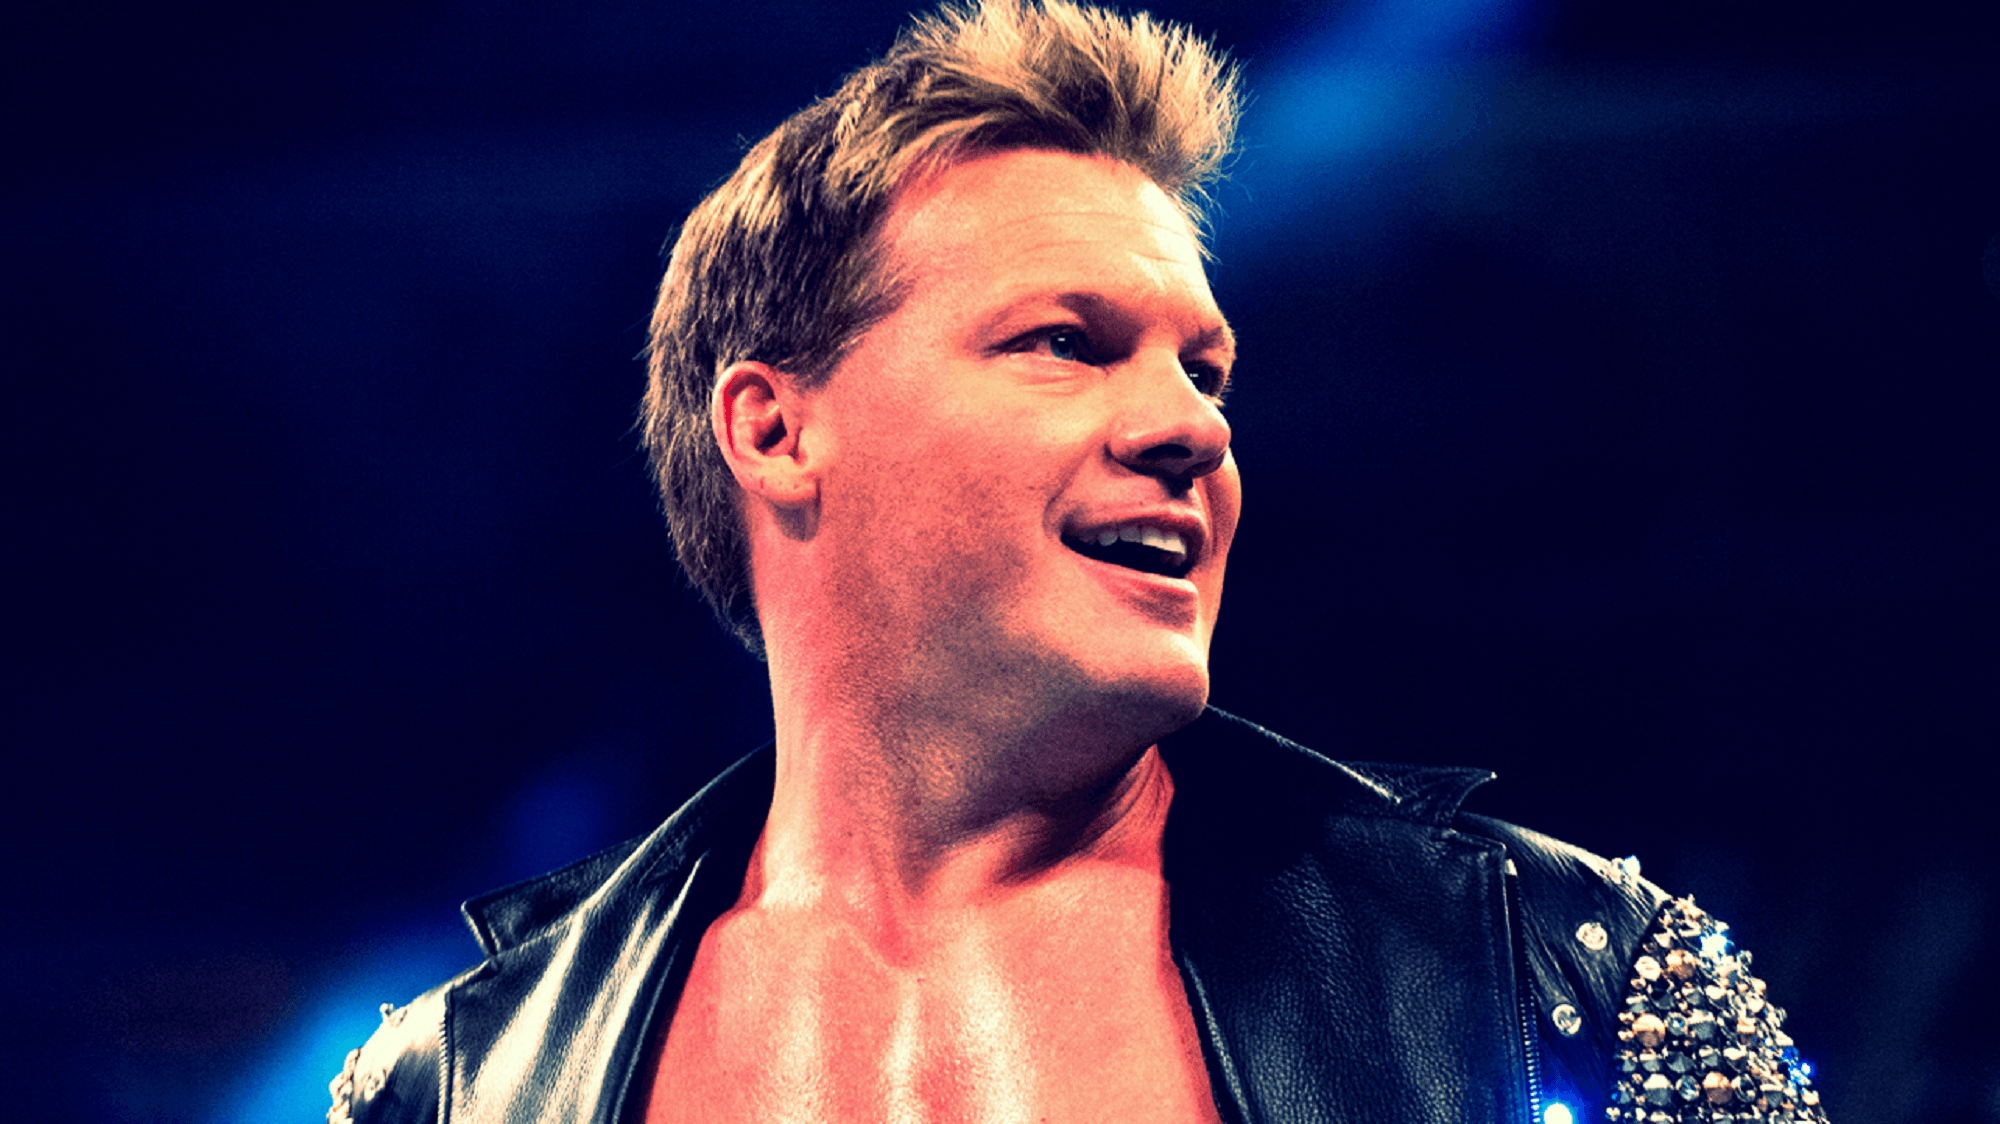 Chris Jericho Wallpaper Image Photo Picture Background